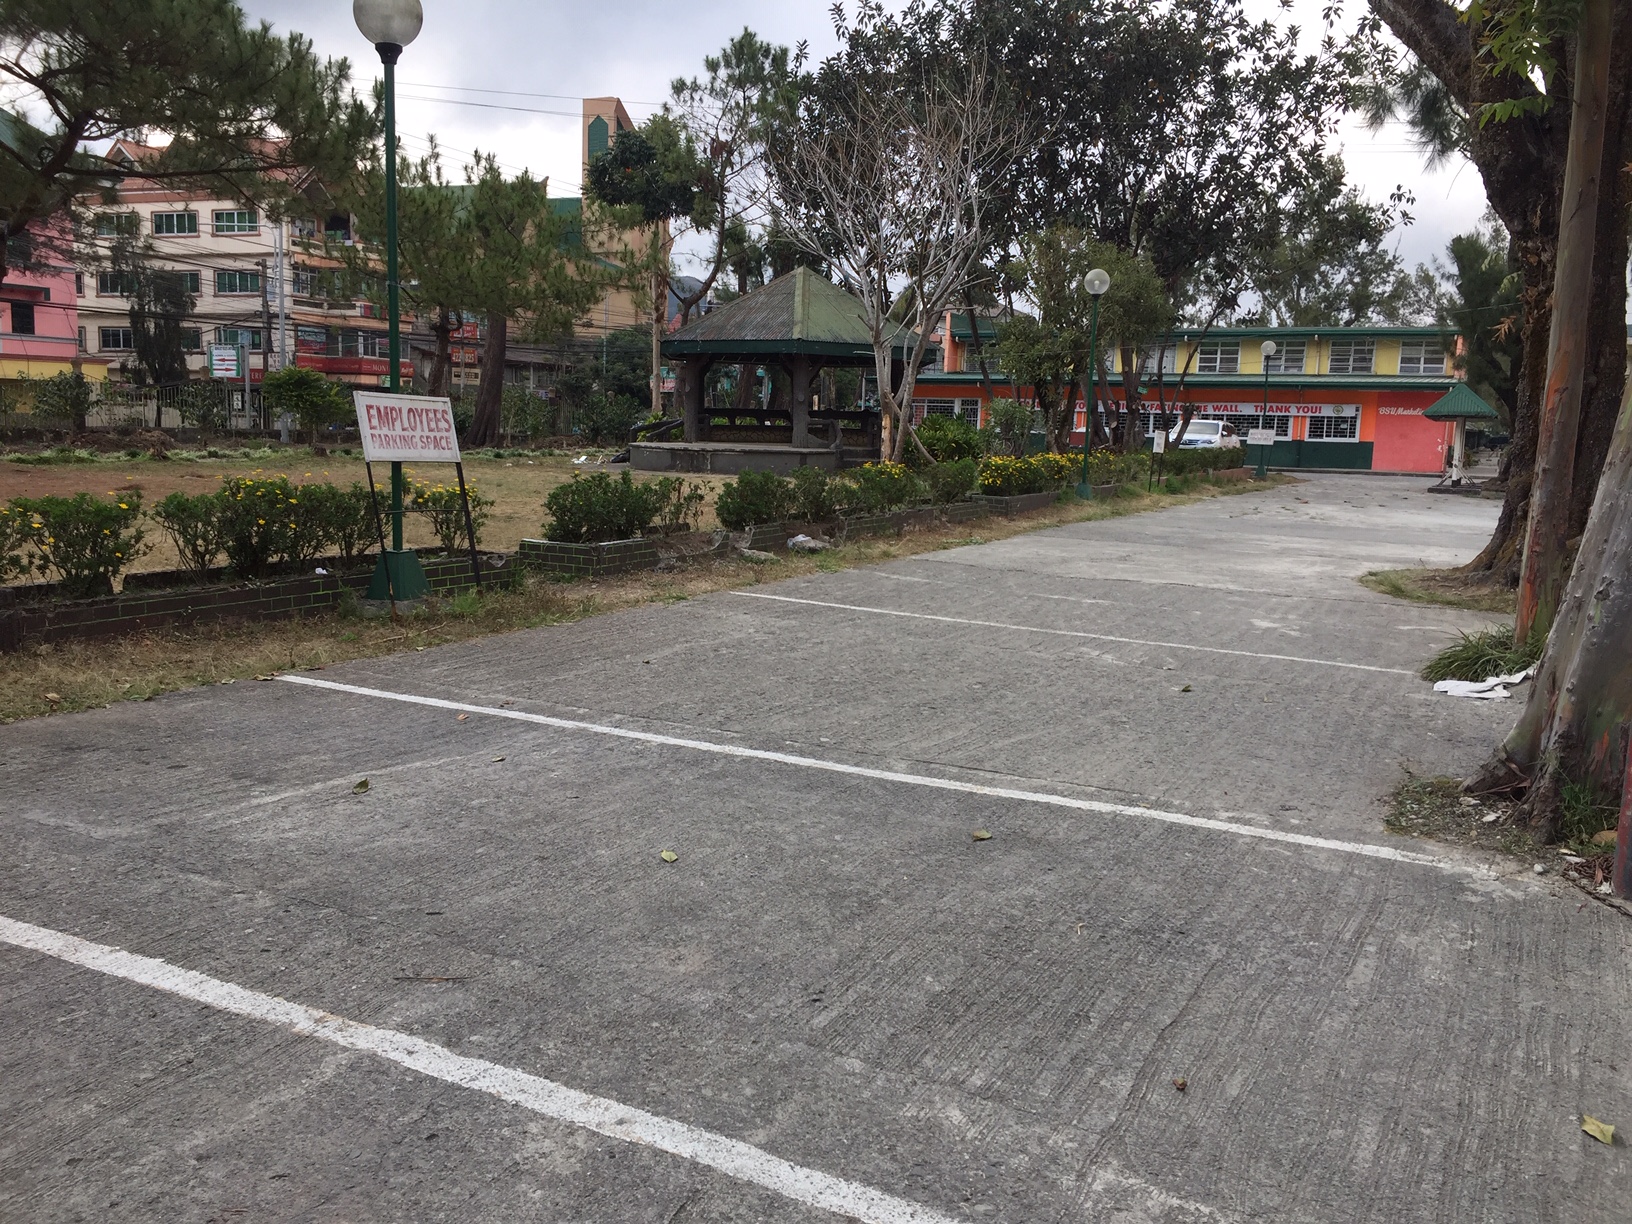 Fig. 1, Empty parking spaces during the carless day